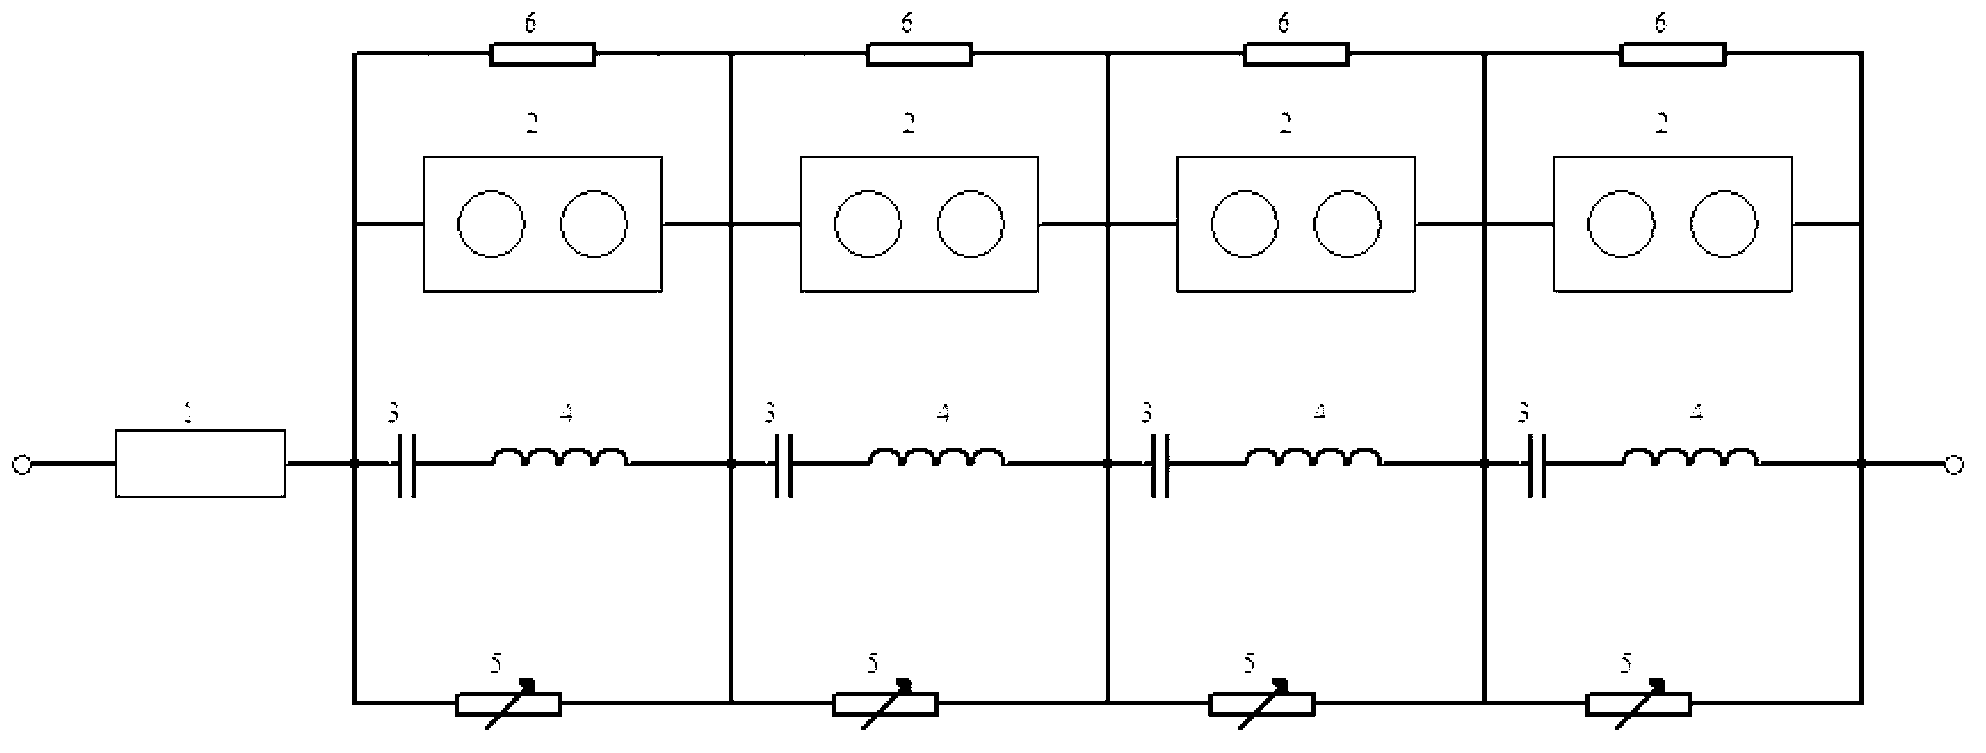 High-voltage direct-current gas breaker based on self-excited oscillation circuit